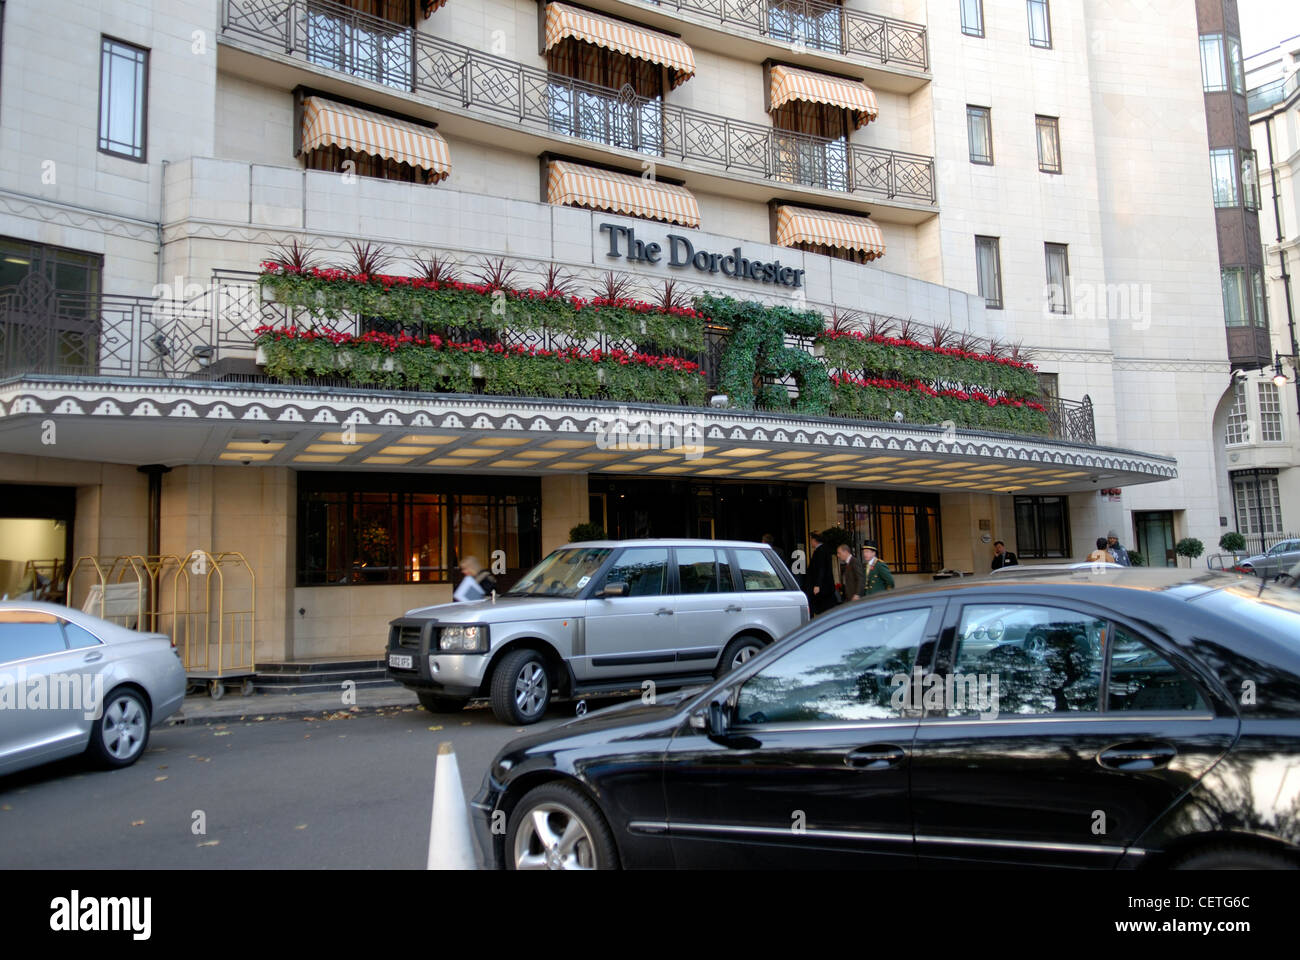 The Dorchester. The Dorchester Hotel opened on 18 April 1931 and was created by Sir Malcolm McAlpine and Sir Frances Towle. Stock Photo